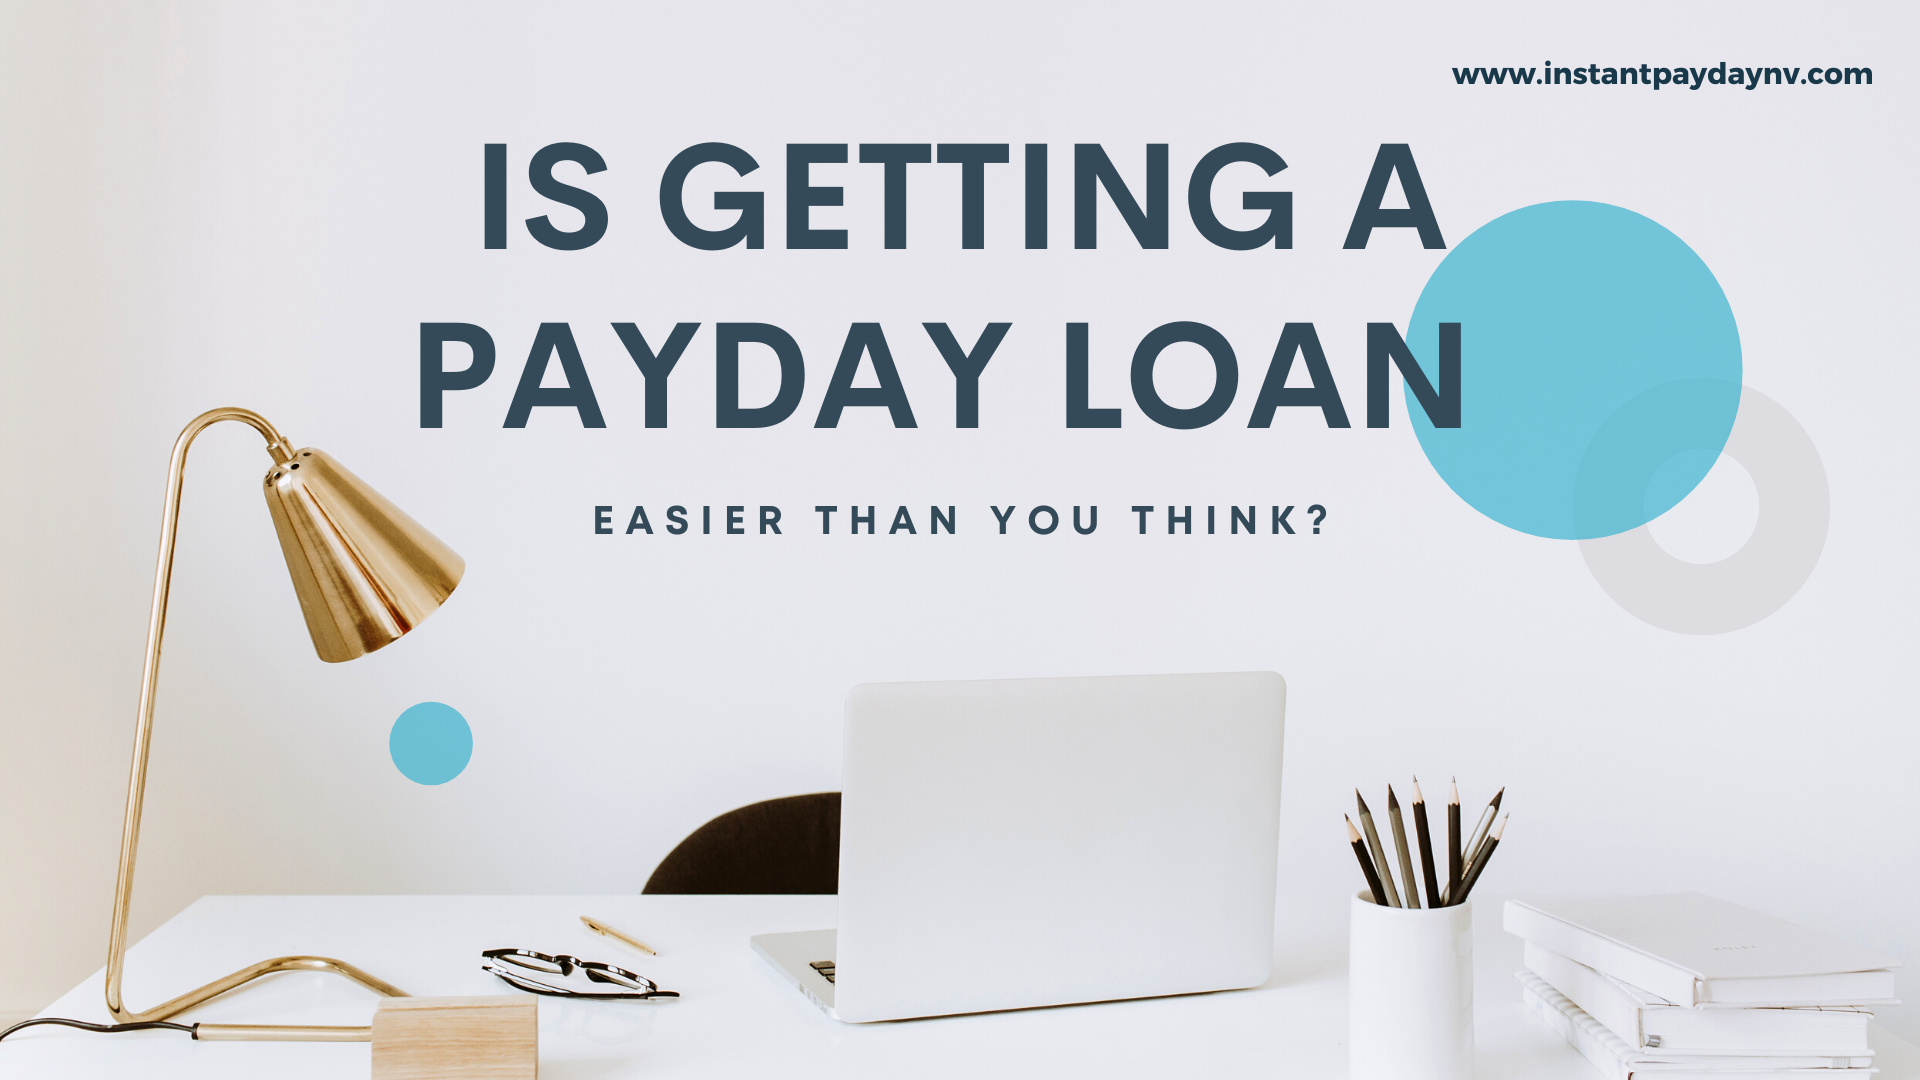 Is Getting a Payday Loan Easier Than You Think